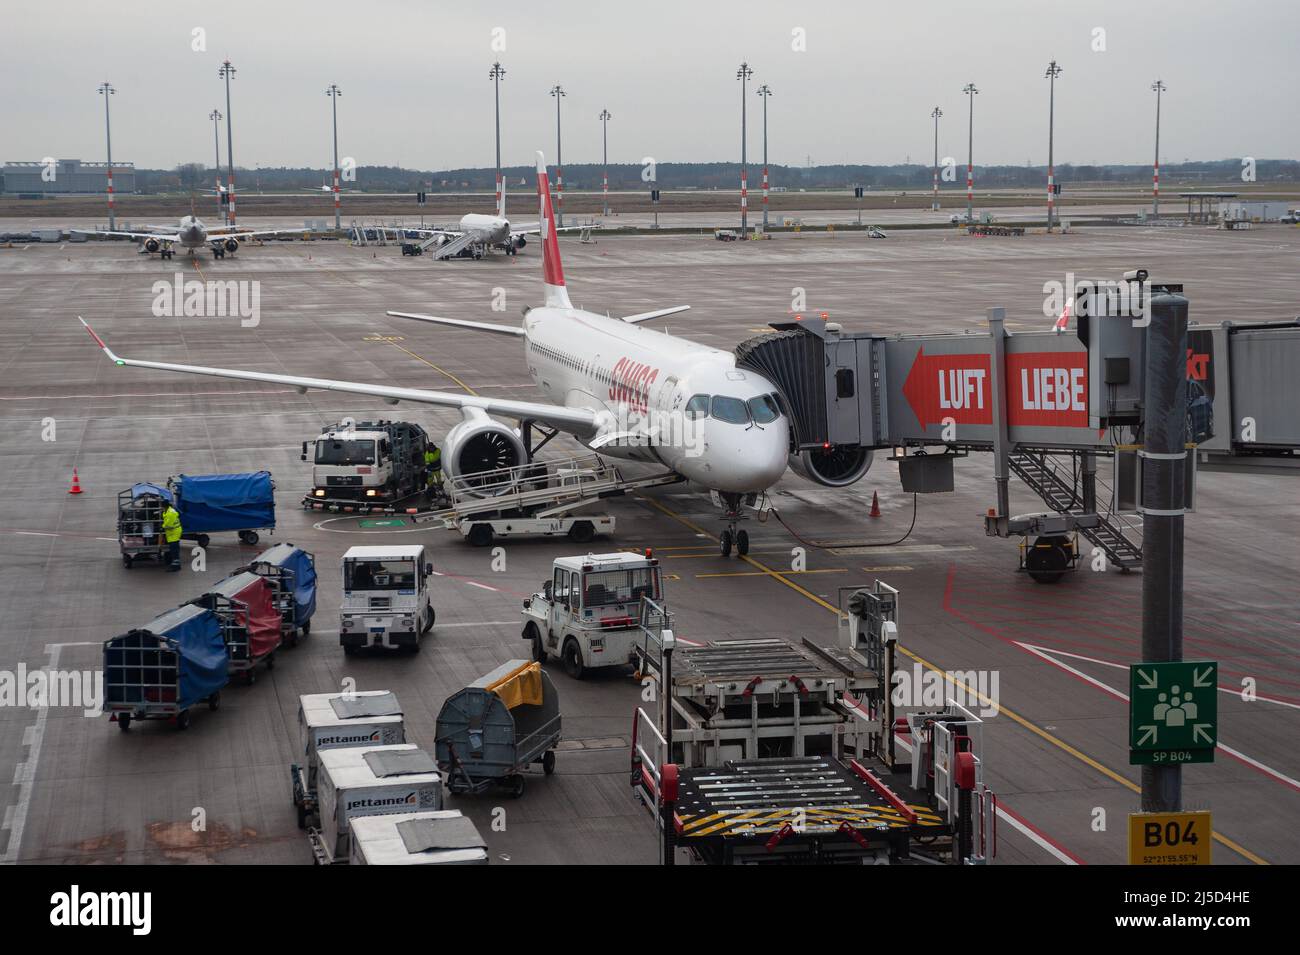 'Dec. 14, 2021, Berlin, Germany, Europe - An Airbus A220-300 passenger aircraft of Swiss Airlines parks at a gate at Berlin Brandenburg ''Willy Brandt'' Airport. Swiss is a member of the Star Alliance aviation alliance, an international network of airlines. [automated translation]' Stock Photo